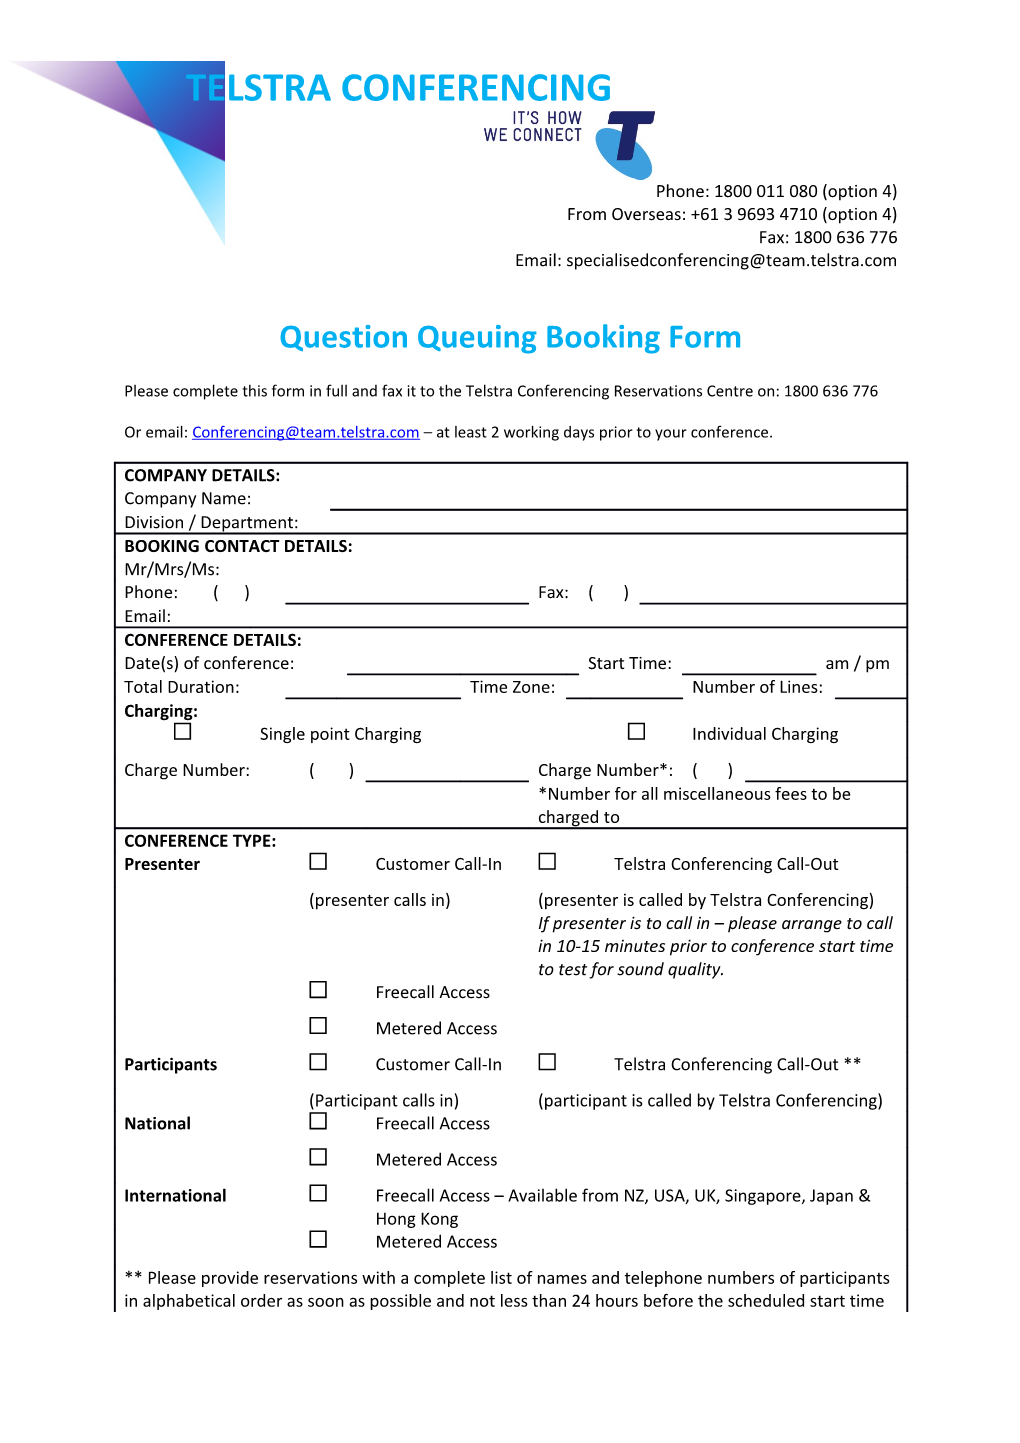 Question Queuing Booking Form